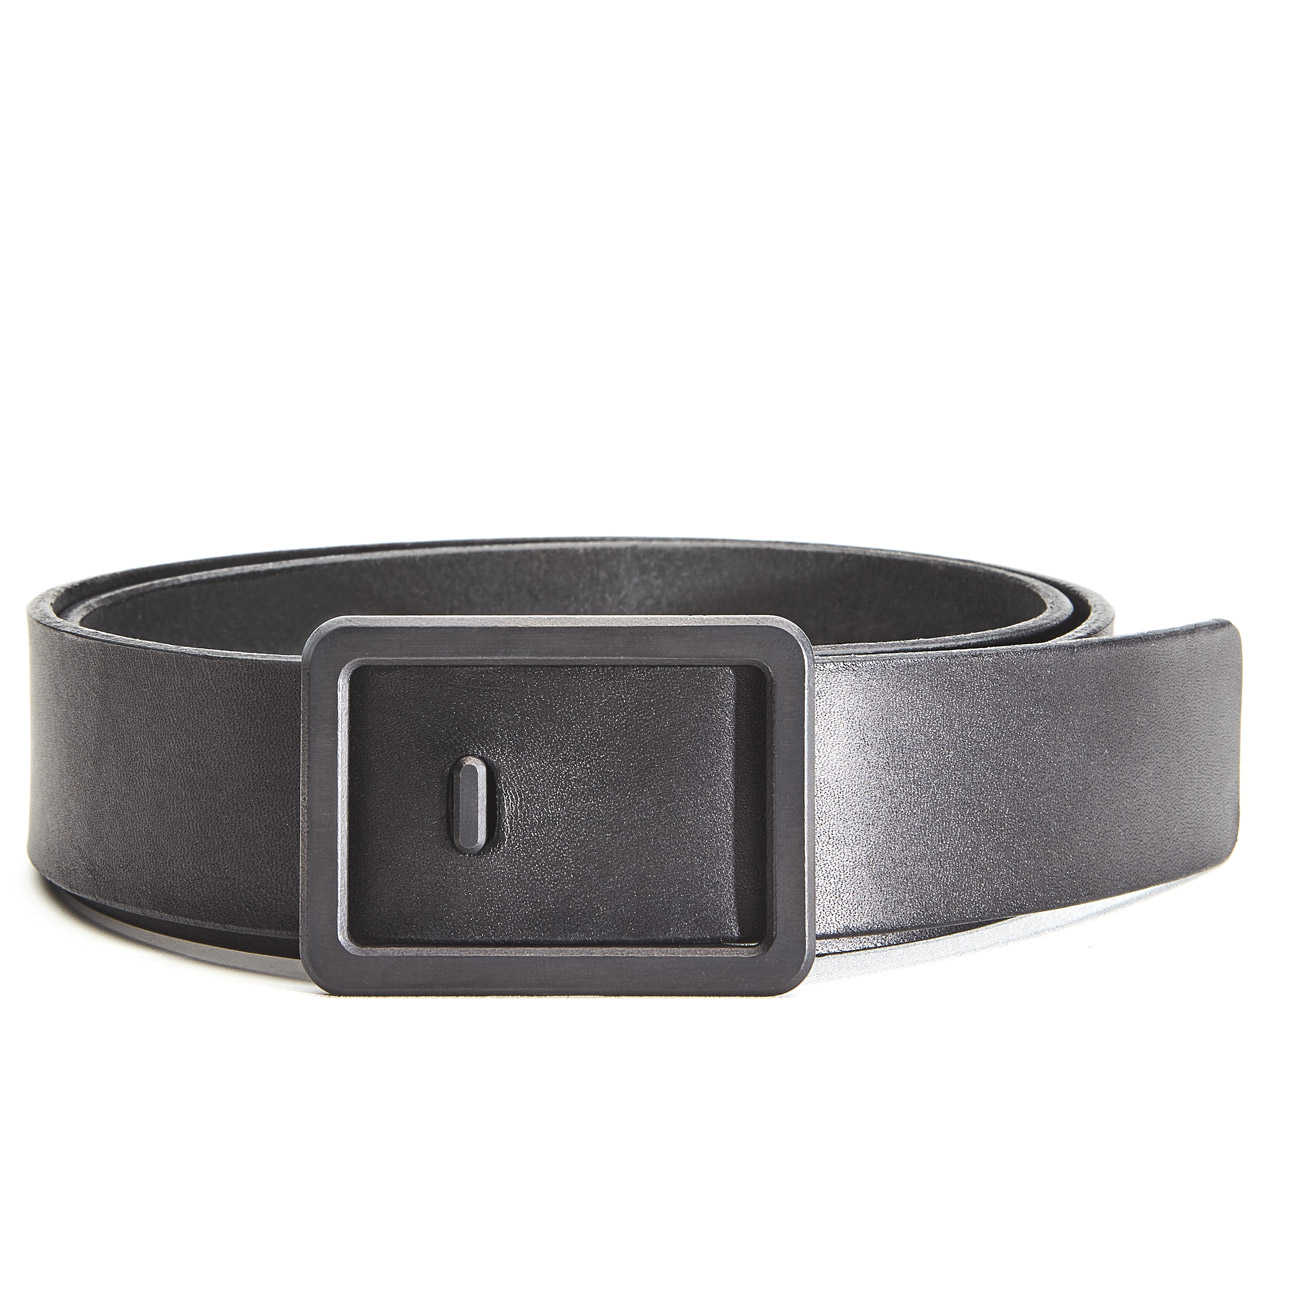 Minimalist Black Belt Solid Stainless Steel Black Buckle and Leather Strap